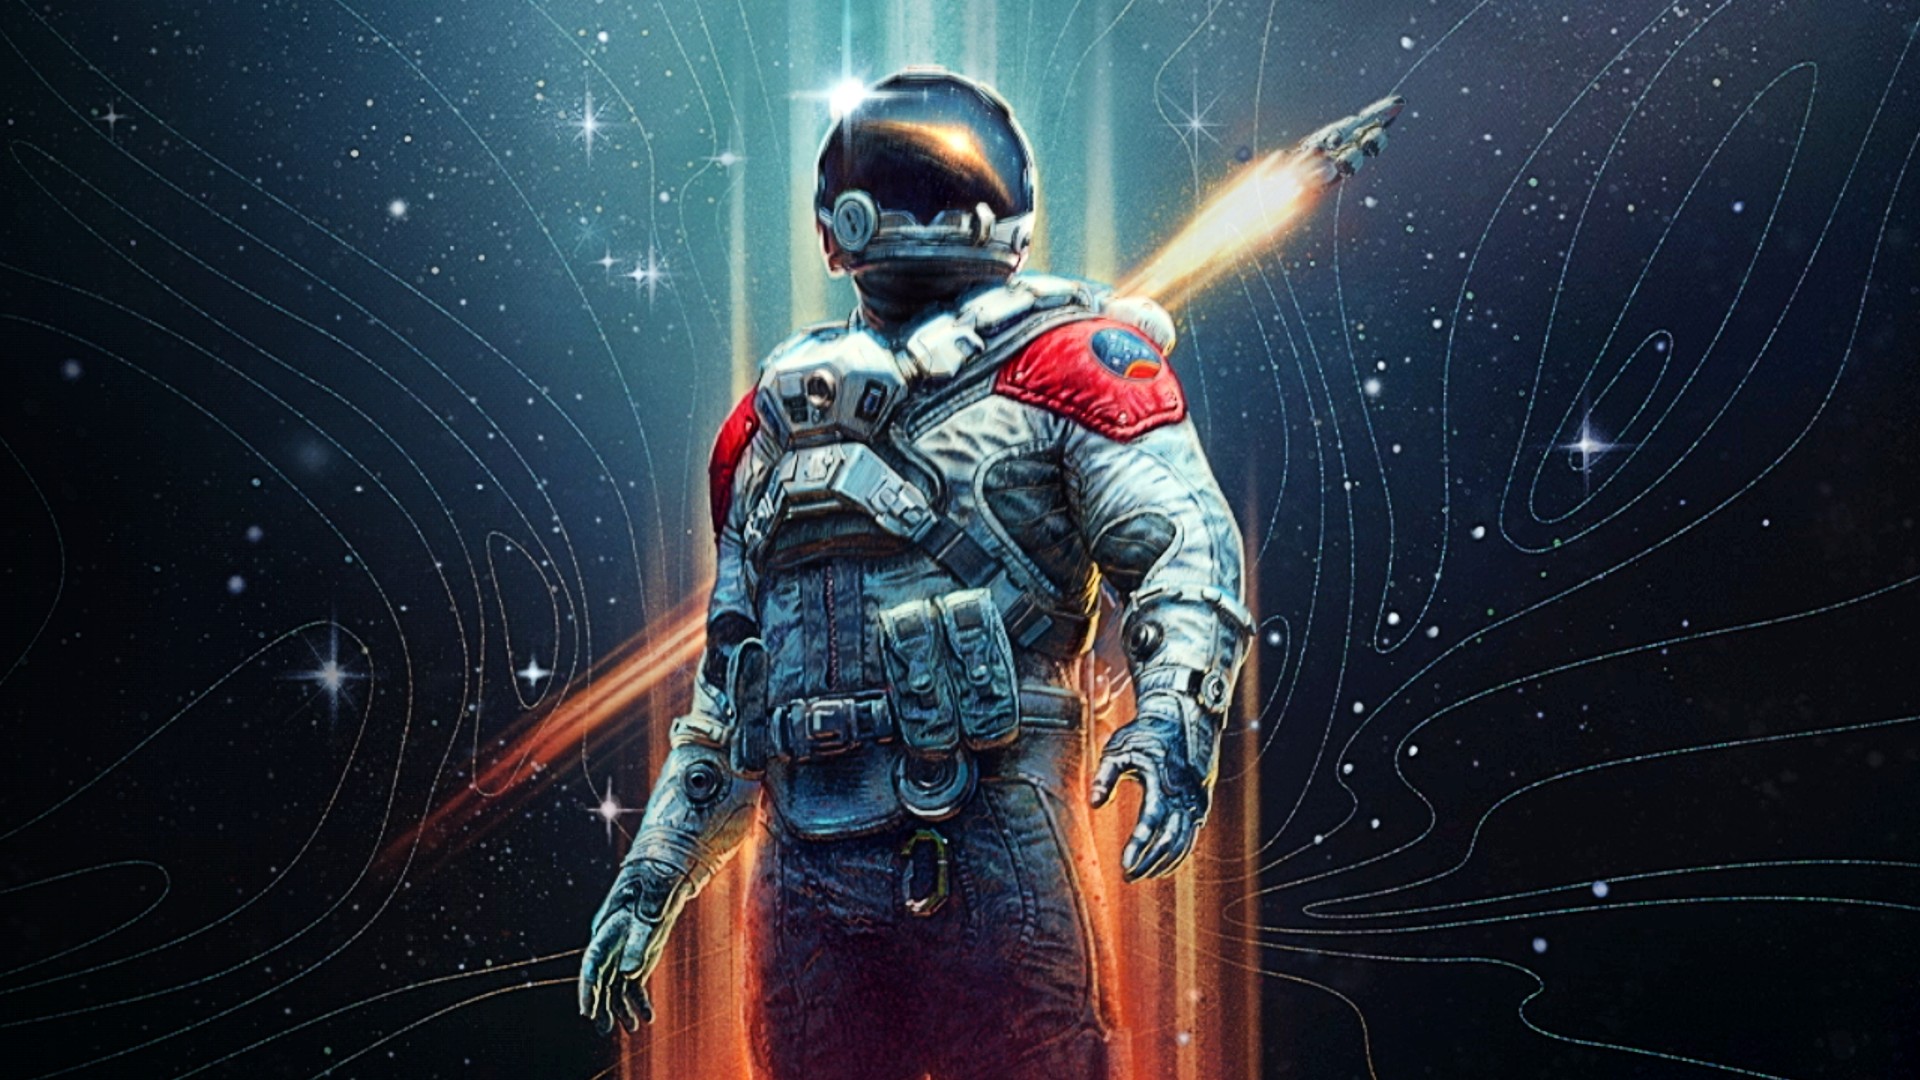 A figure in a Starfield space suit looks up at the sky as a sun cresting over the surface of a planet reflects in the suit's visor.